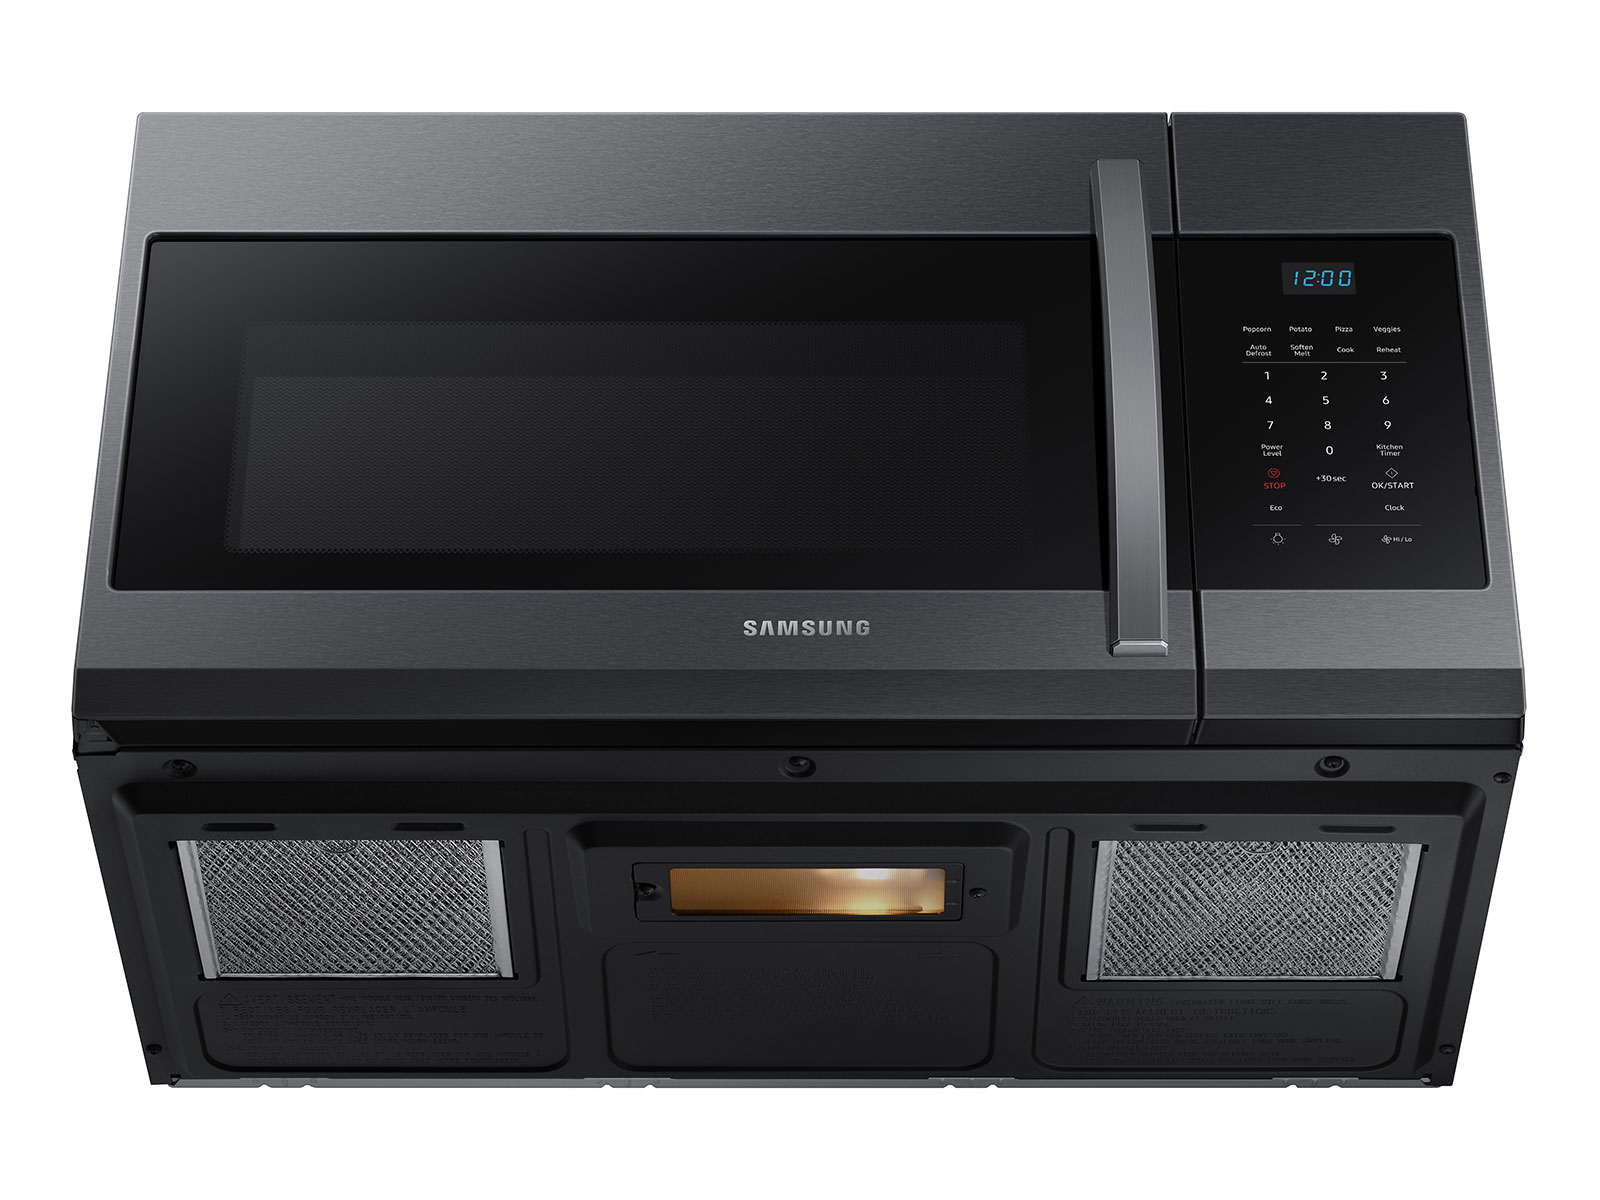 Samsung 30 1.7 Cu. Ft. Over-the-Range Microwave with 10 Power Levels & 300  CFM - Black Stainless Steel